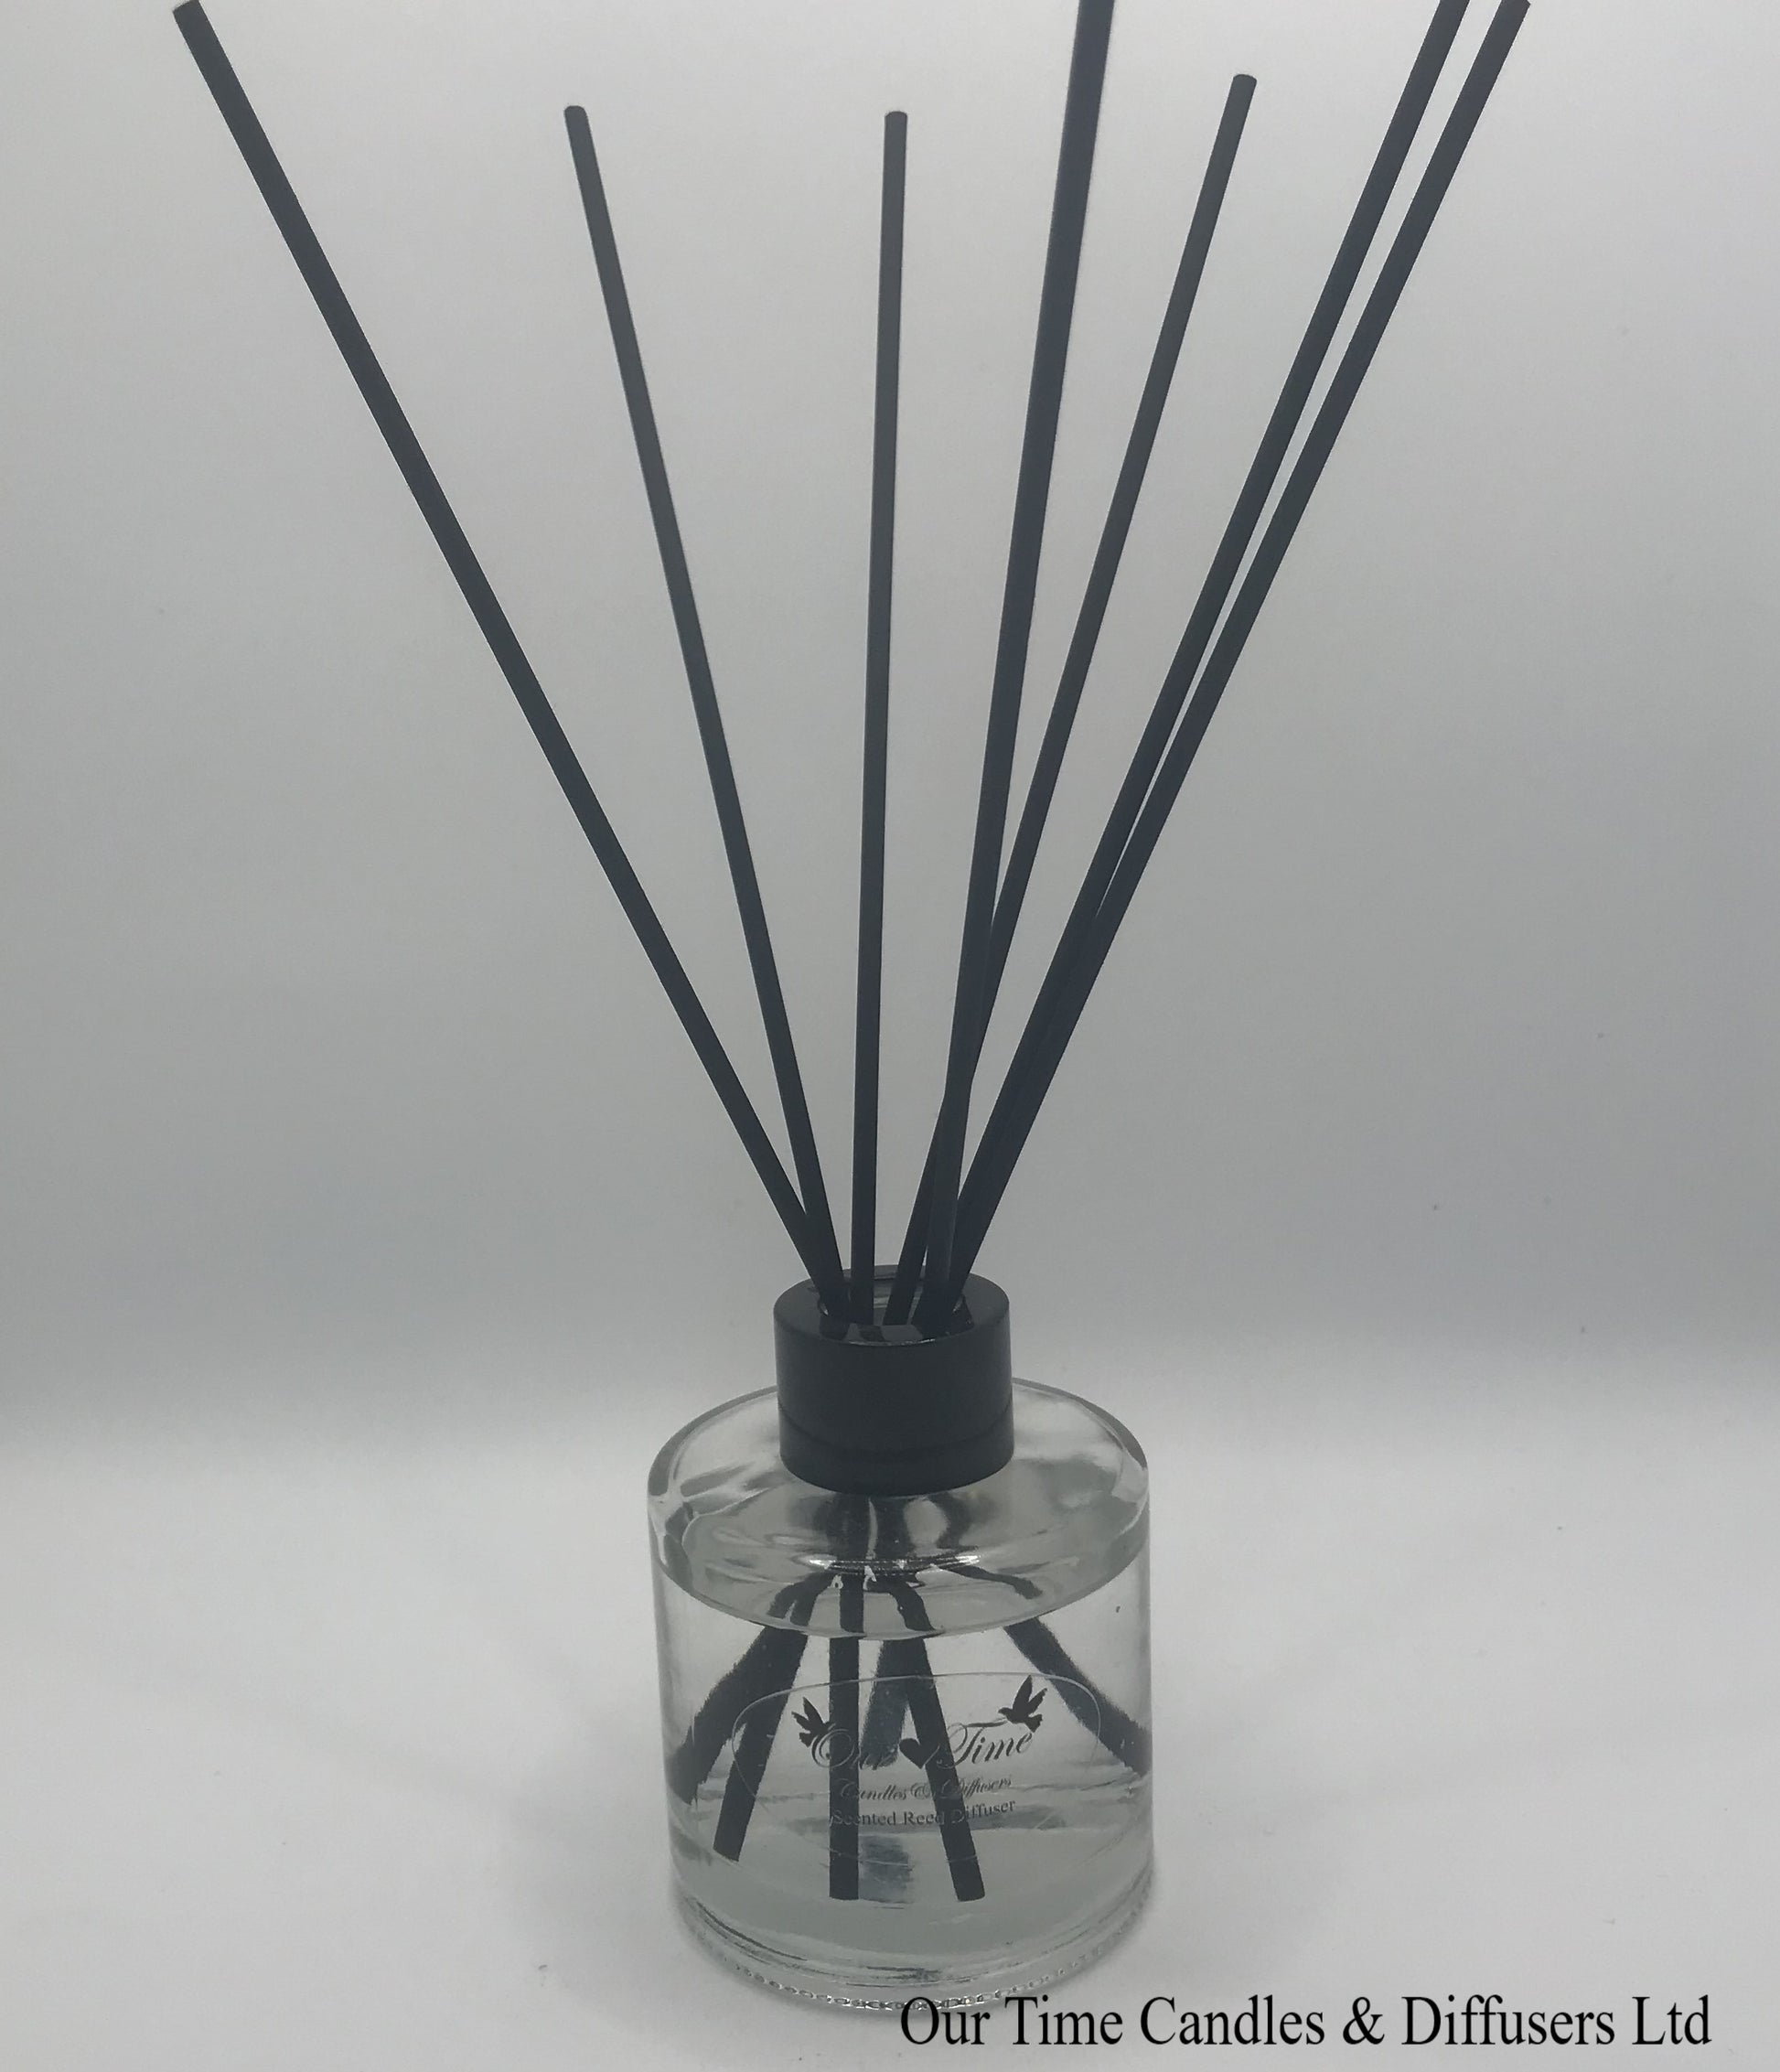 Reed Diffuser 100ml Relaxing